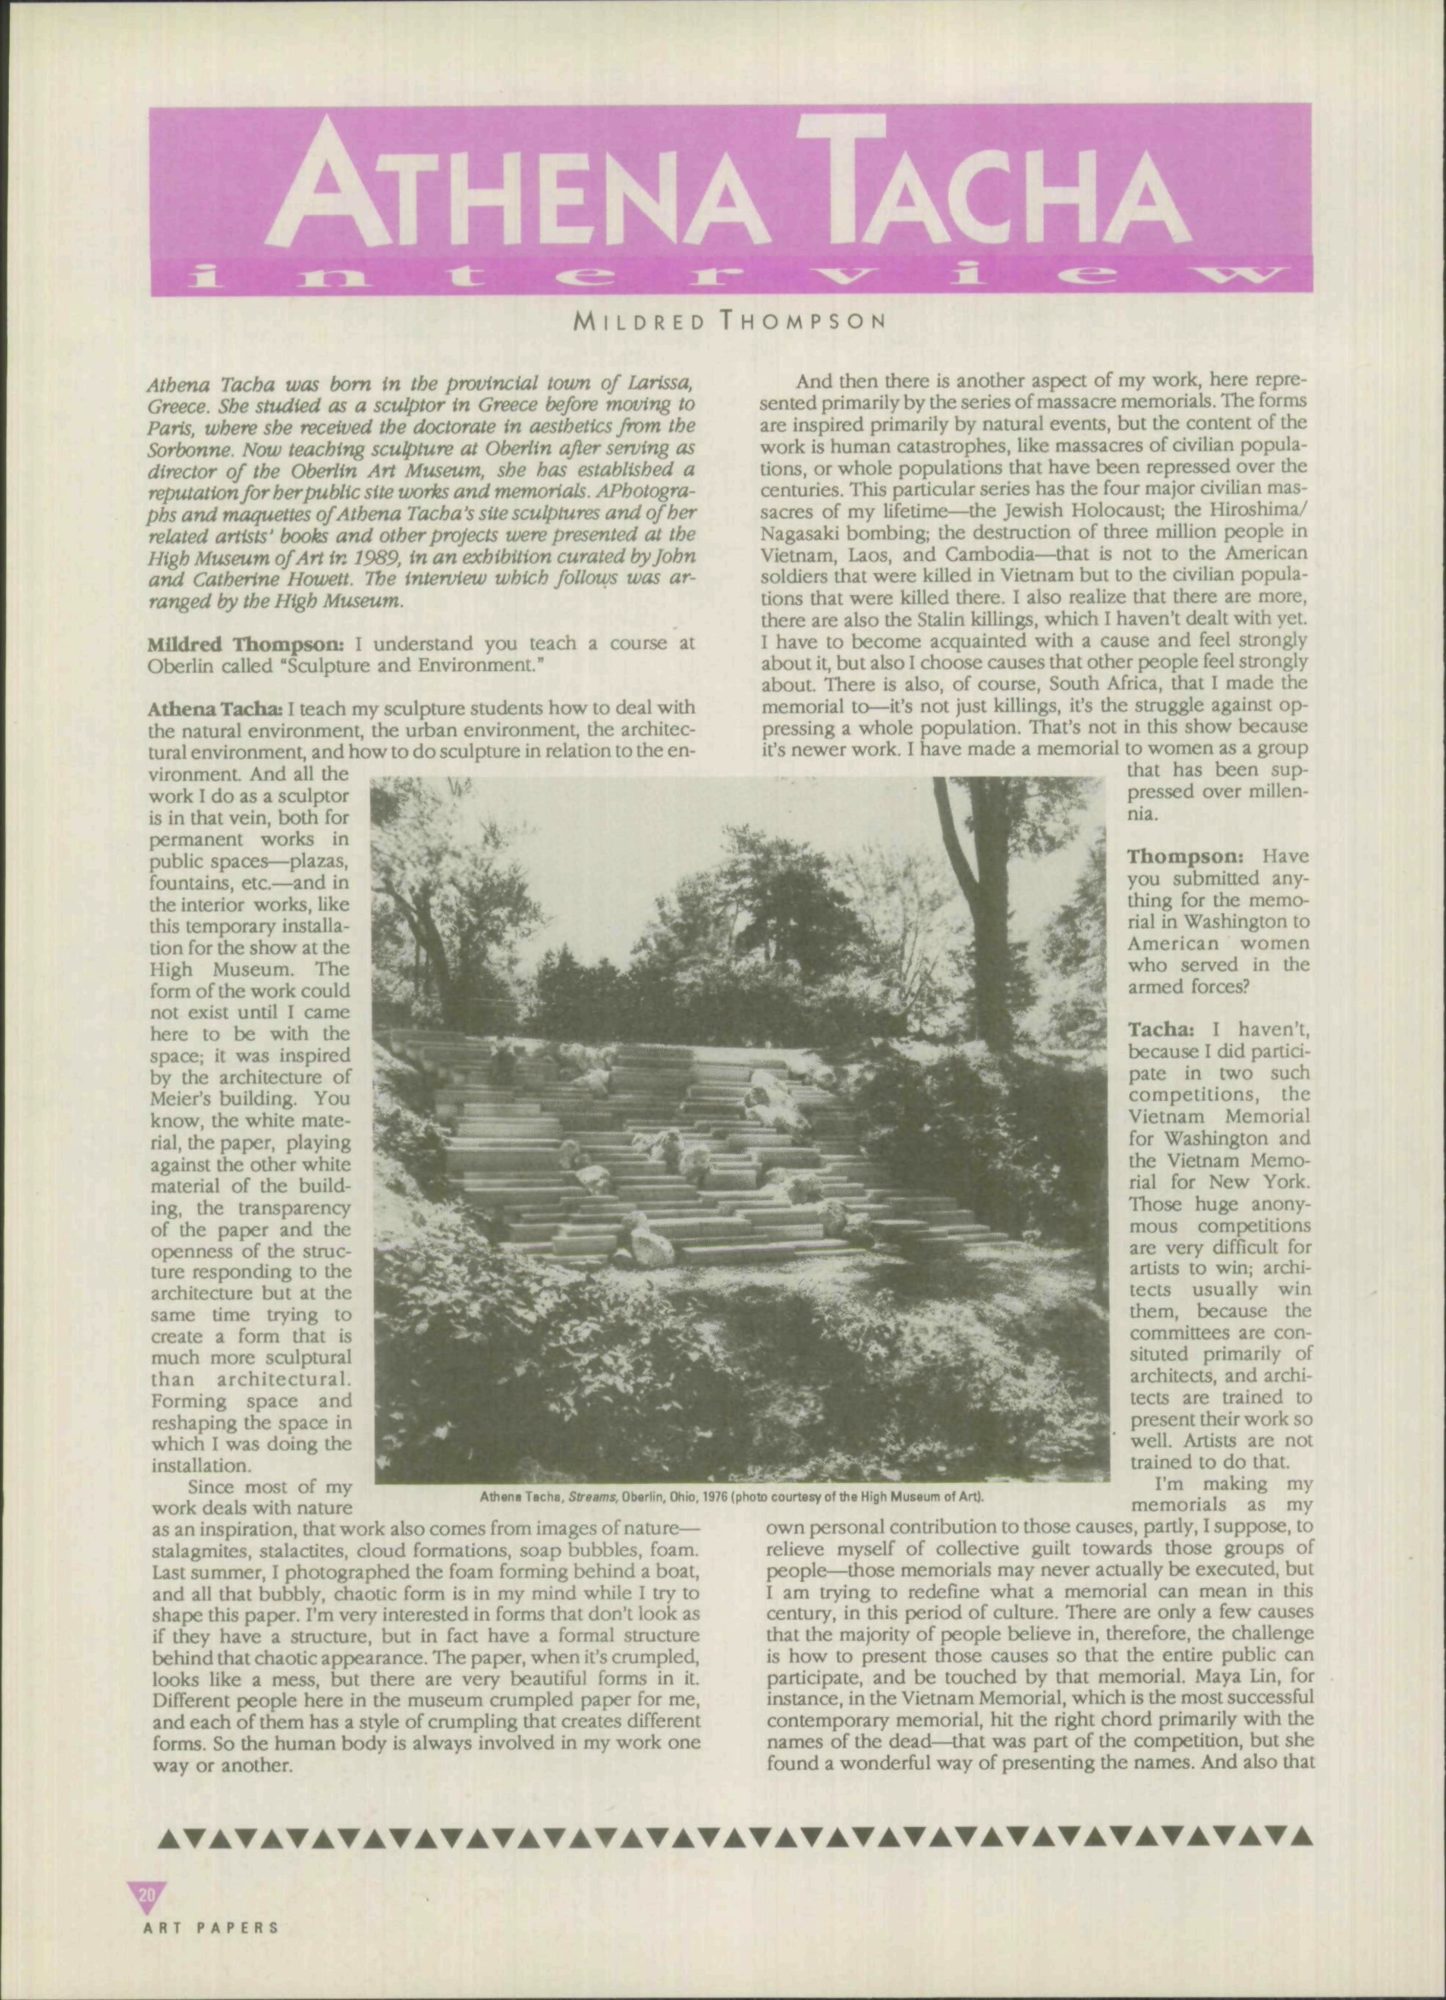 Scan of an interview between Mildred Thompson and Athena Tacha.